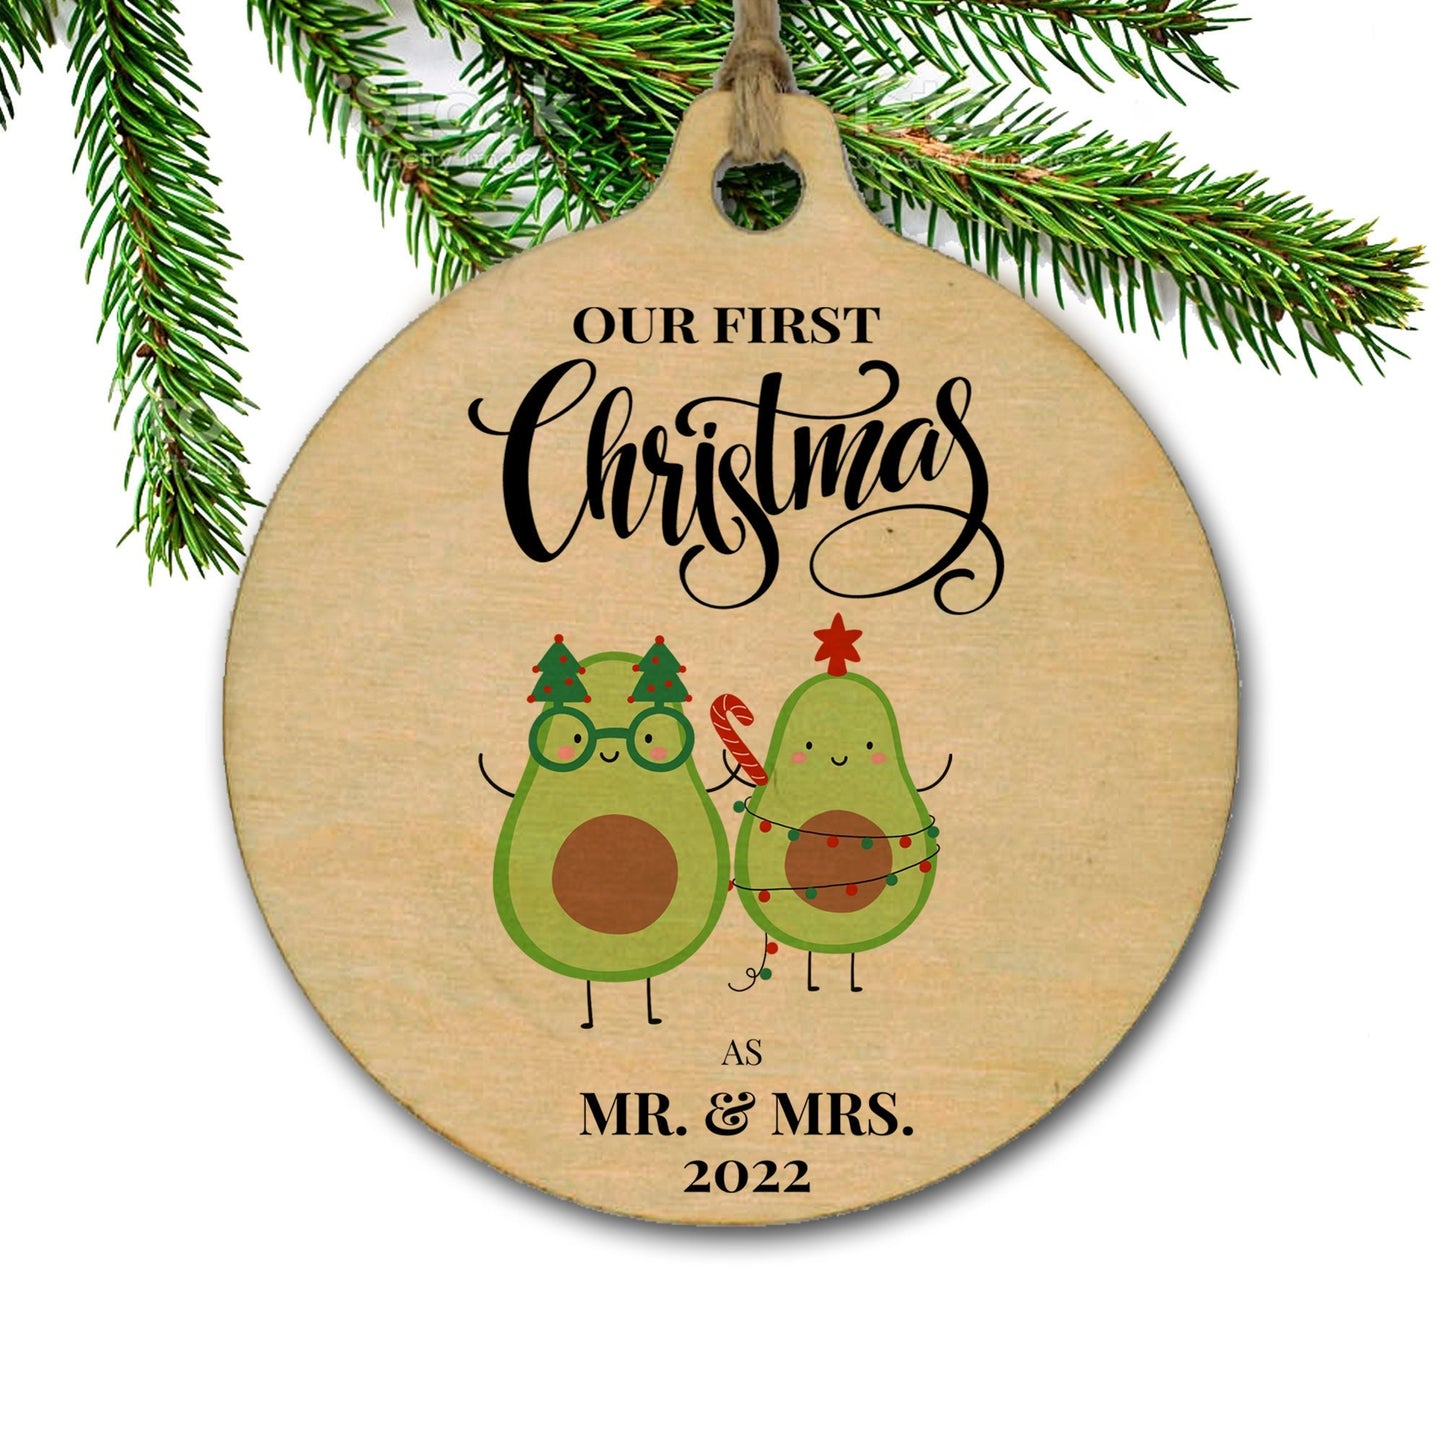 Mr. & Mrs. Christmas ornament, wedding gift, First Christmas, Avocado gift, Just married, 3" wooden ornament